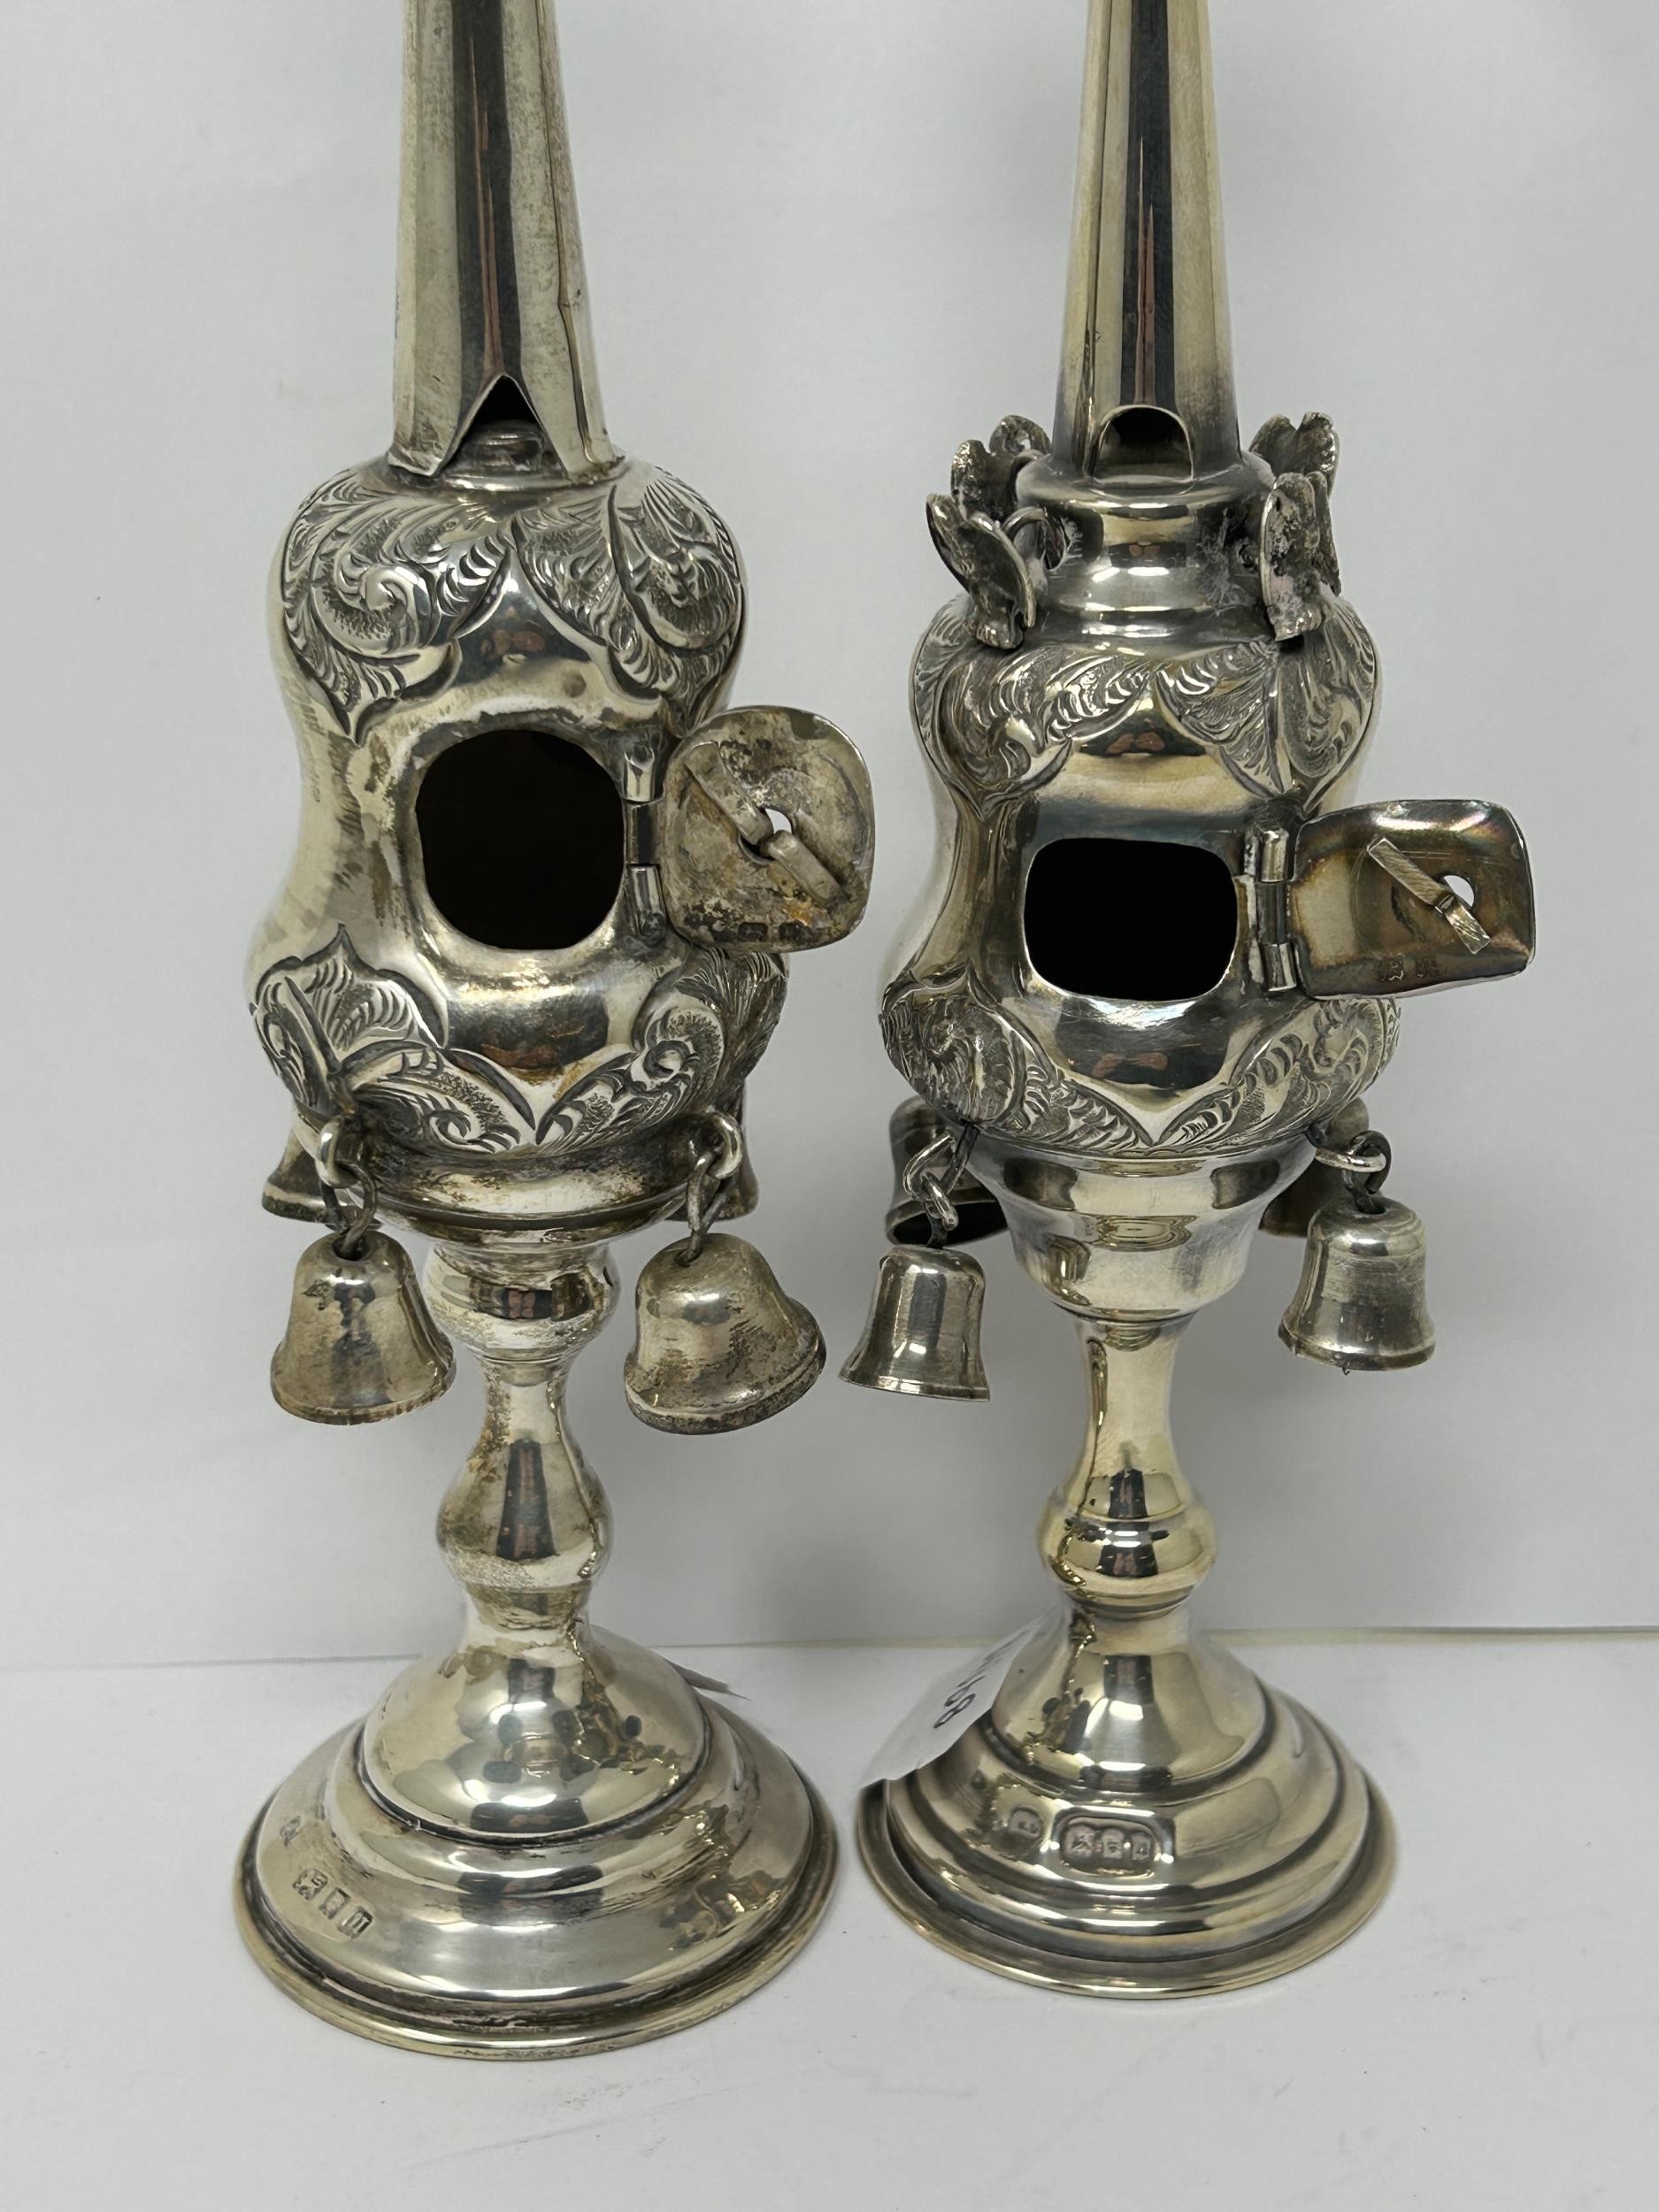 A pair of George V silver incense burners with bells, London 1935, 8.2 ozt (2) - Image 5 of 6